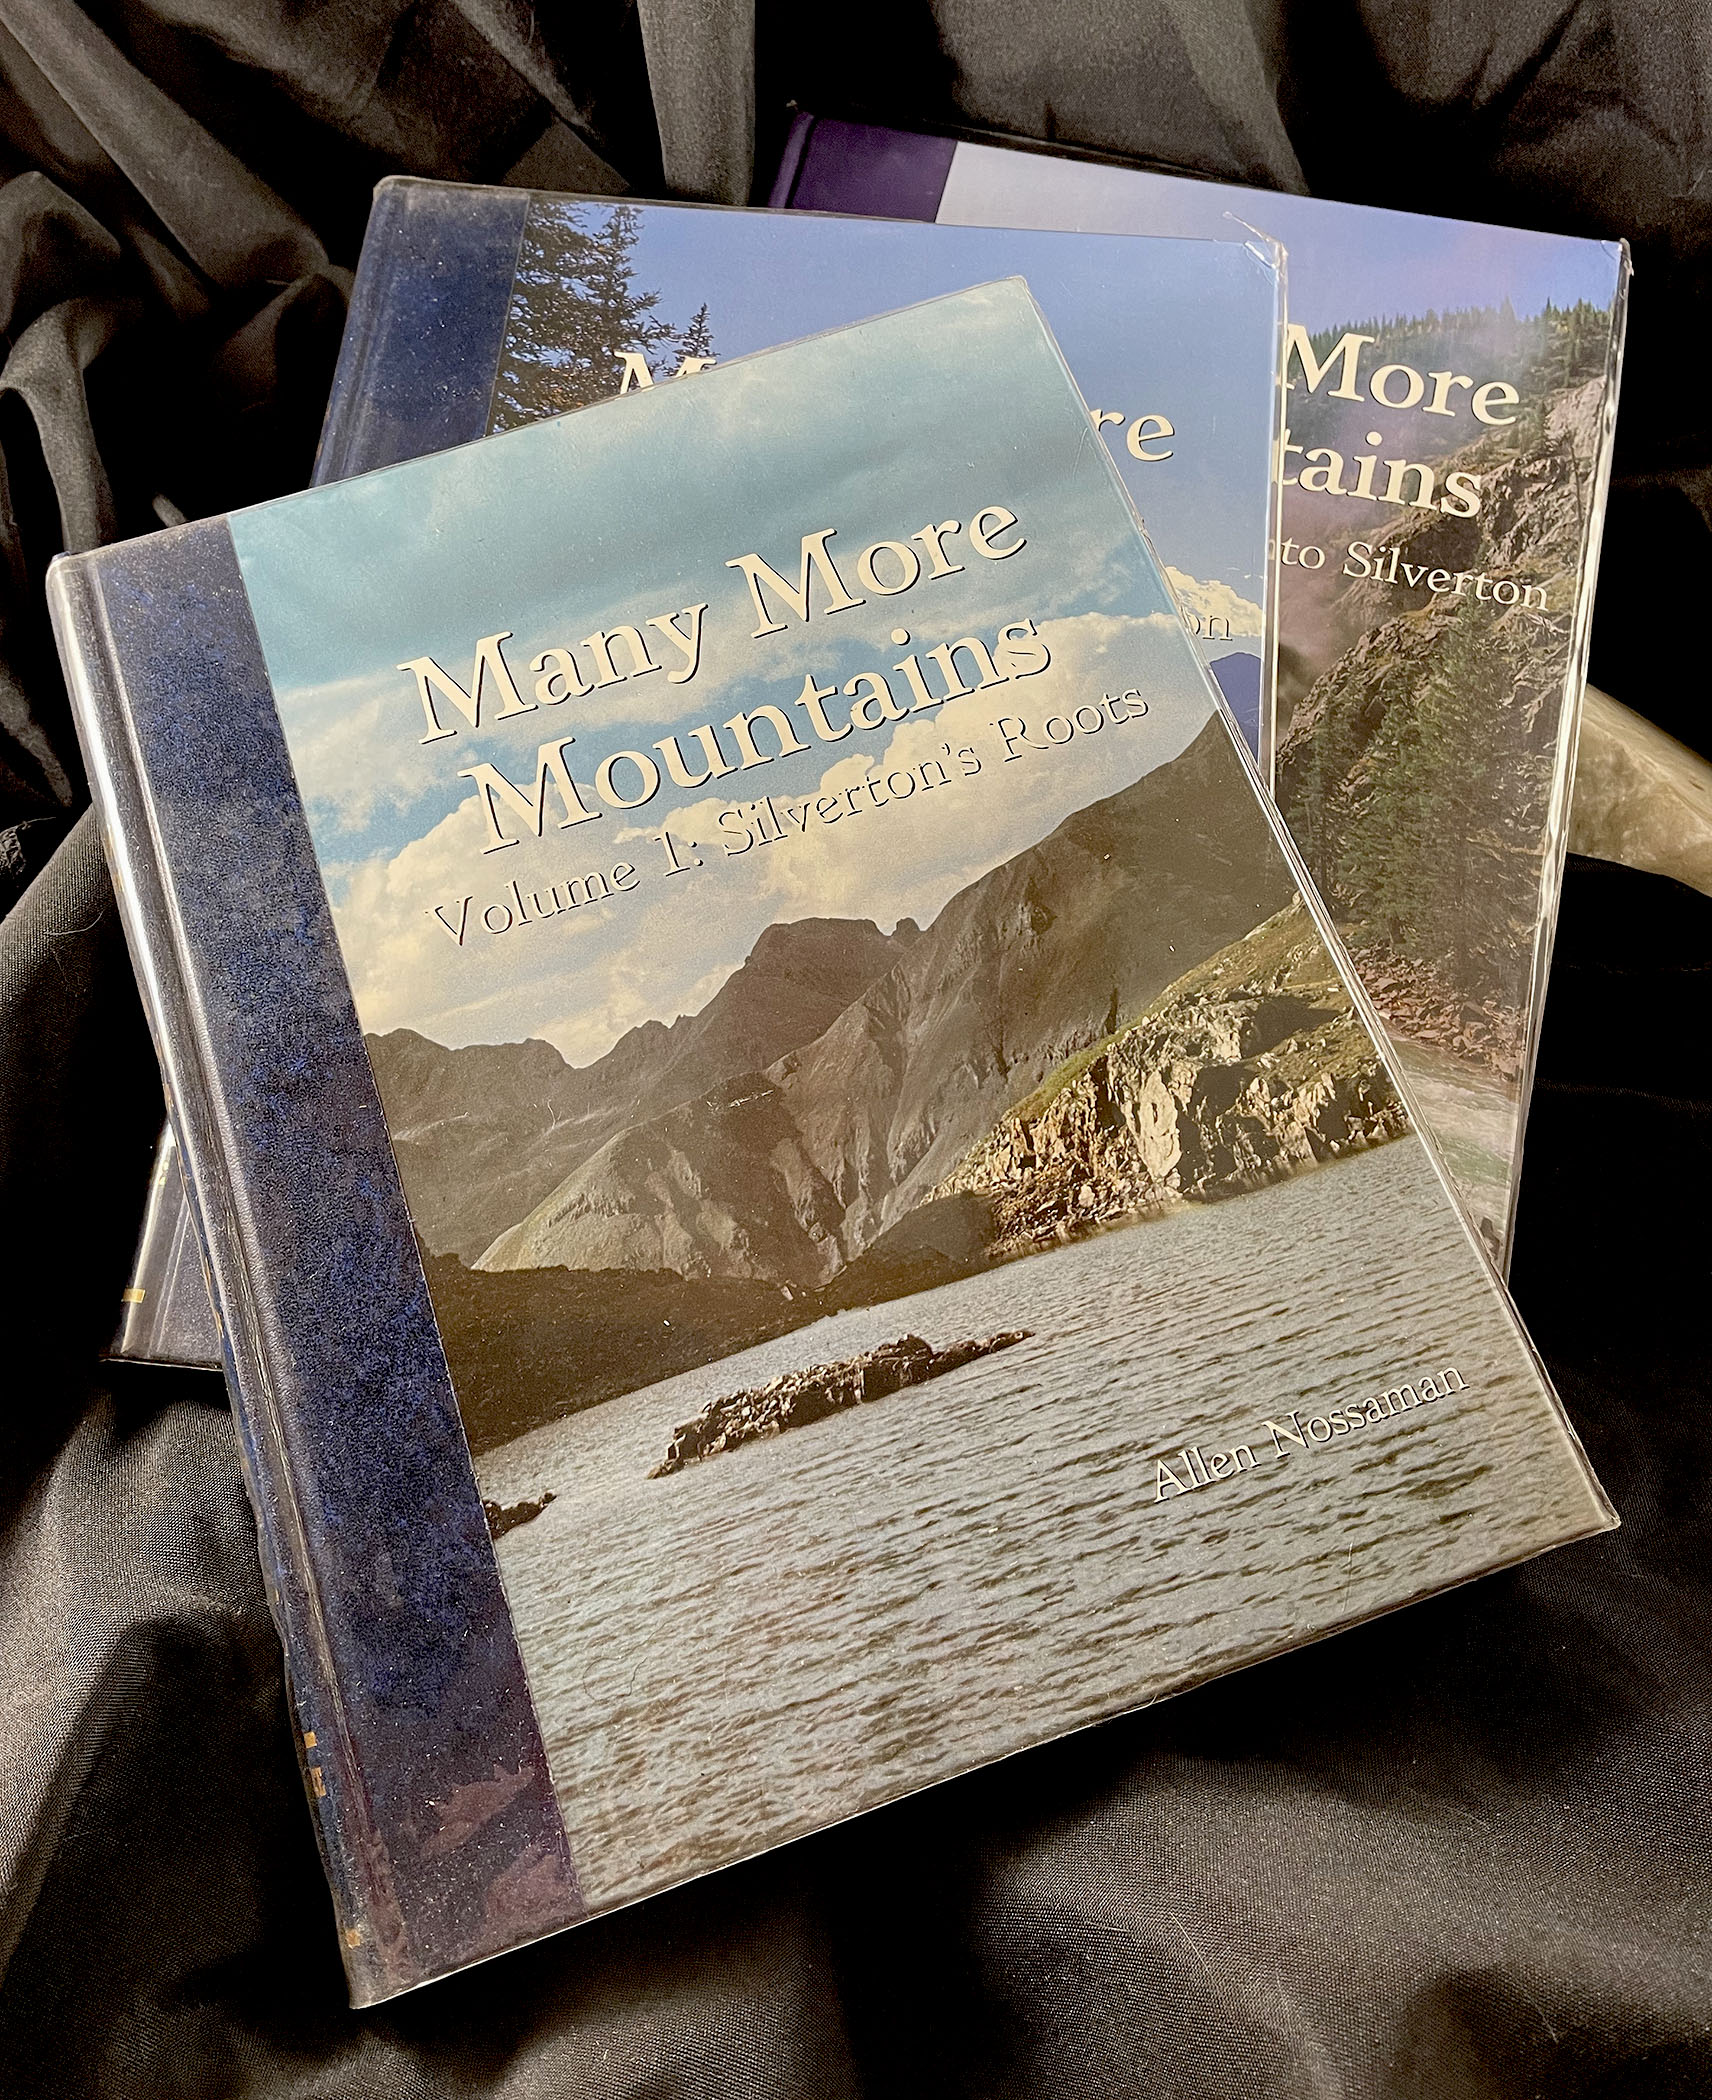 MANY MORE MOUNTAINS by Allen Nossaman 3-volume set Silverton Colorado history signed first editions